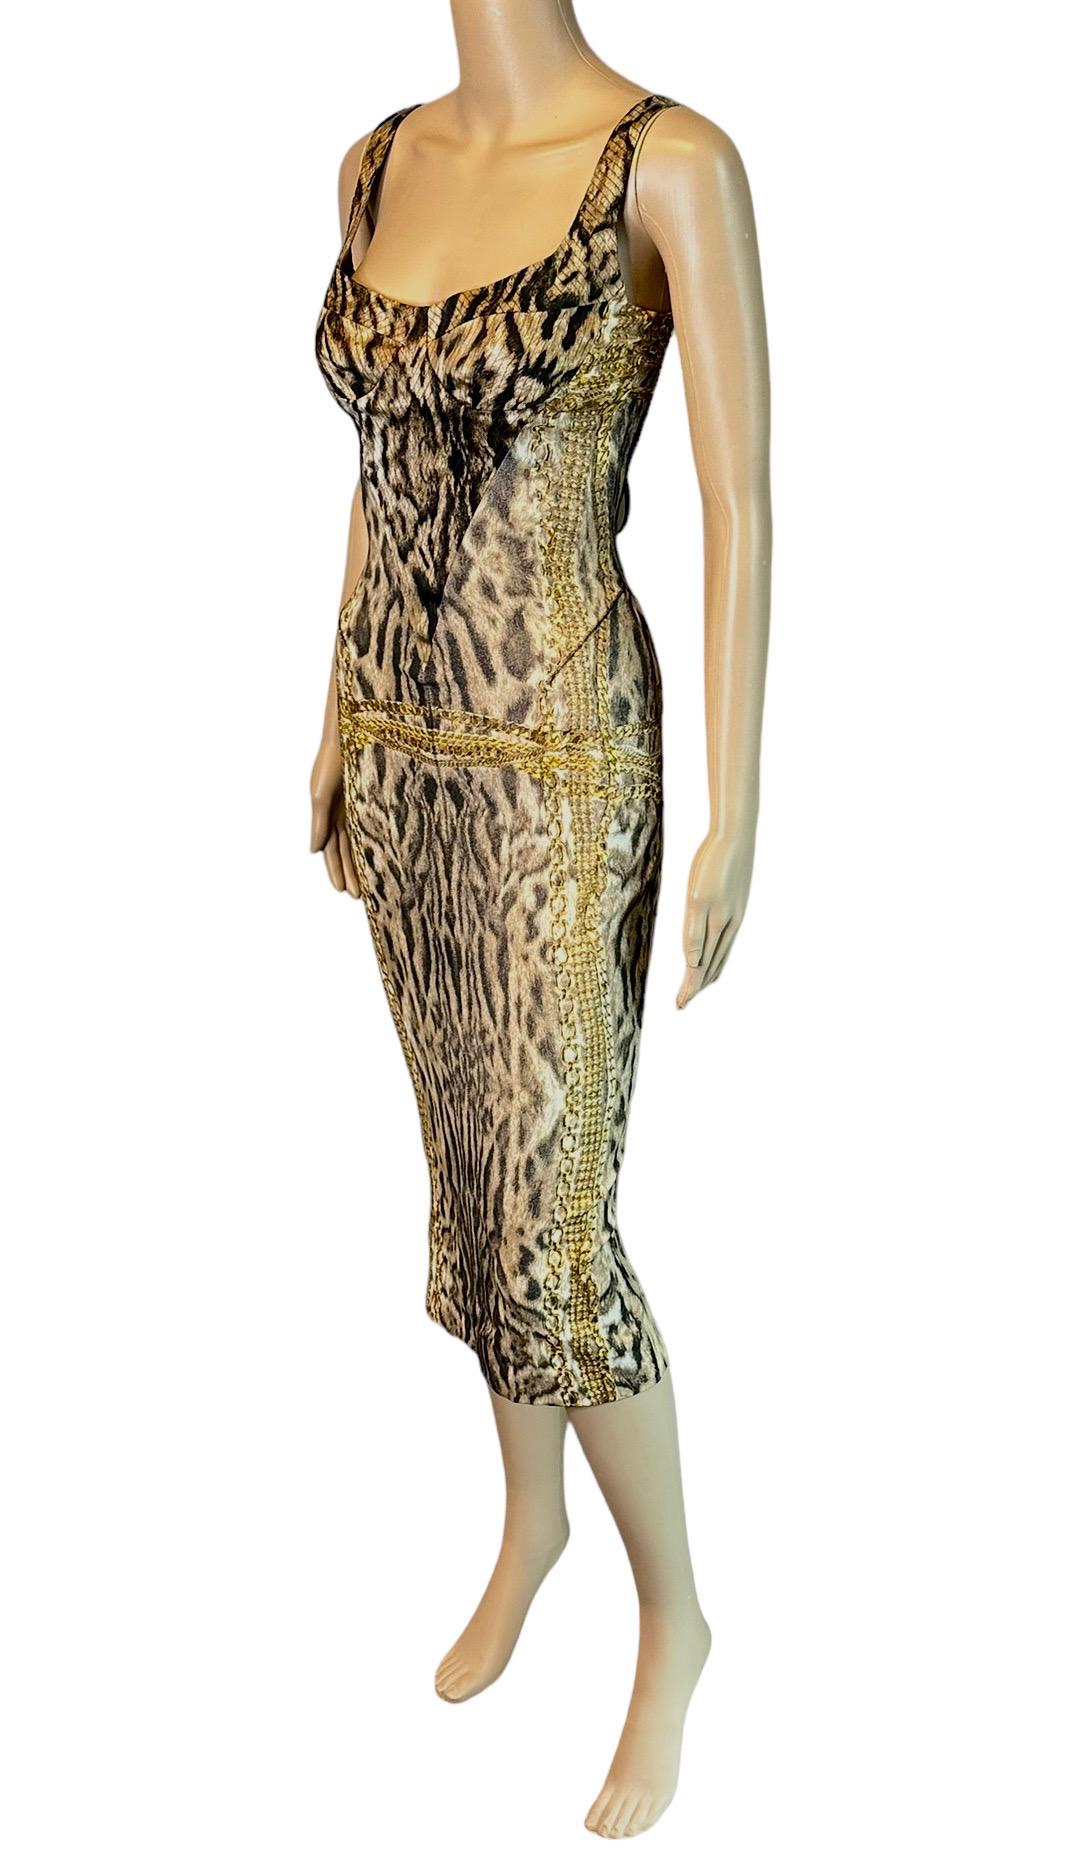 Roberto Cavalli F/W 2003 Bustier Corset Lace Up Animal Chain Print Silk Dress For Sale 3